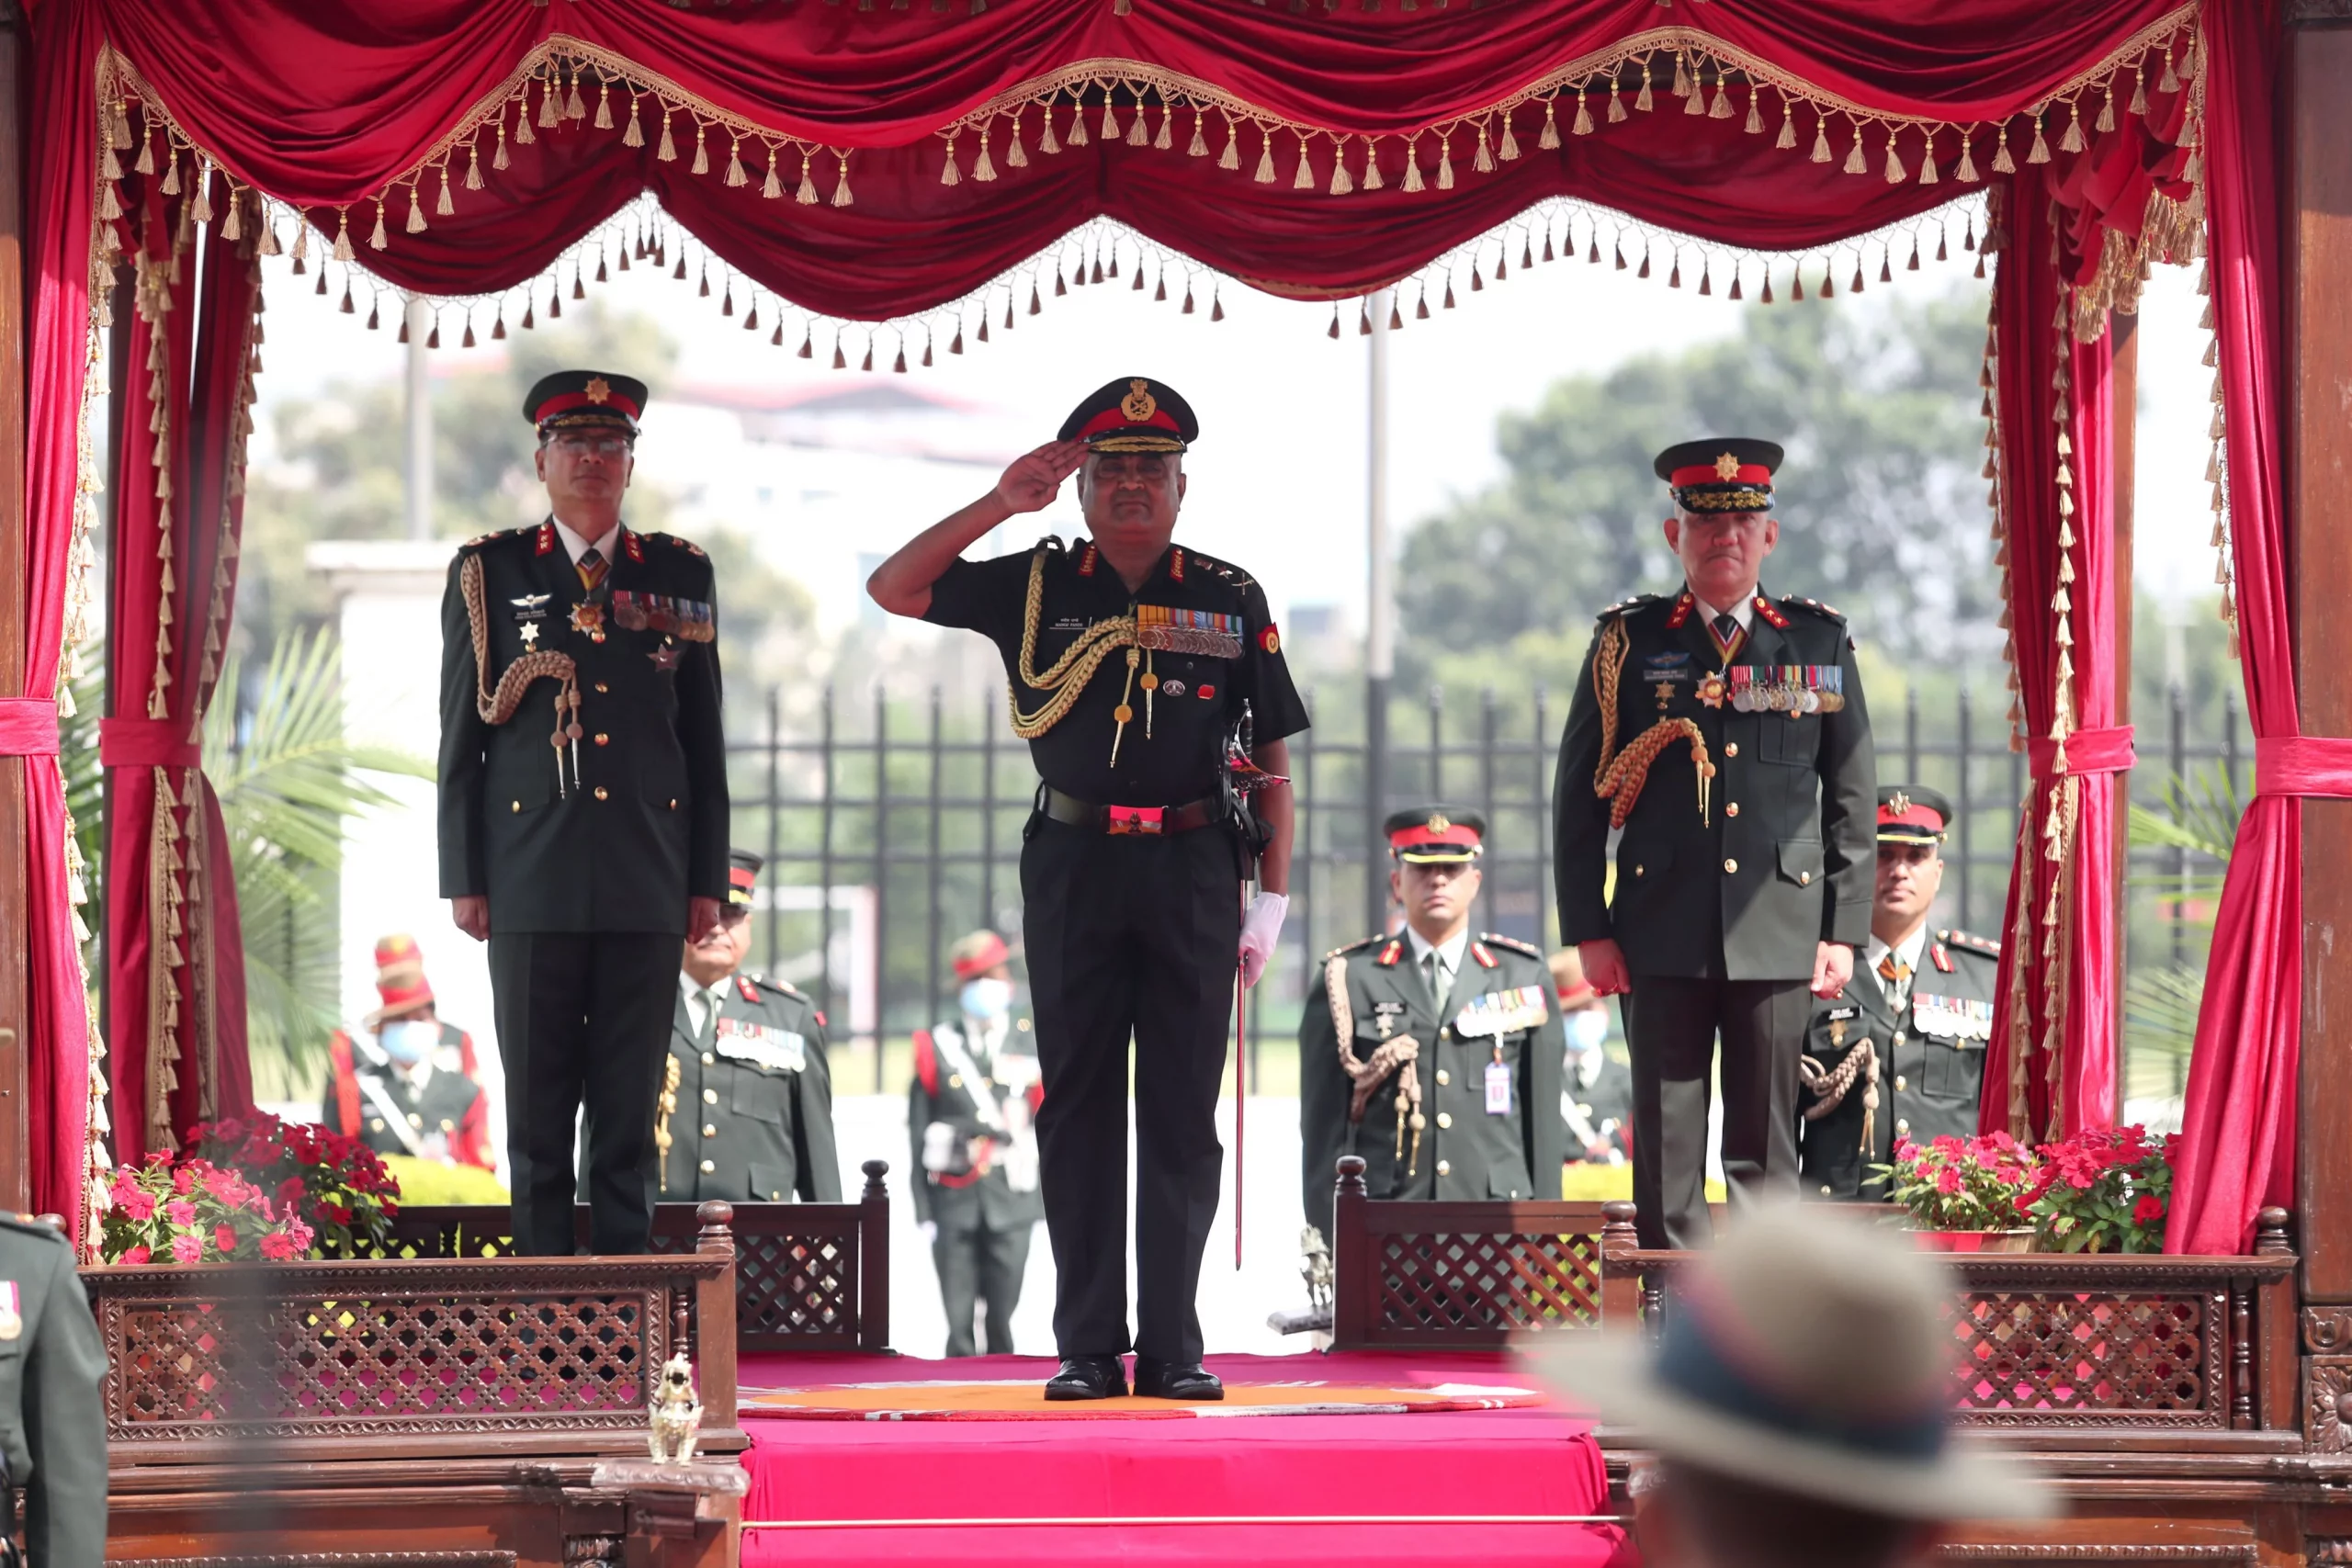 Indian Army chief pays homage to martyrs, inspects guard of honor as he begins five-day Nepal trip